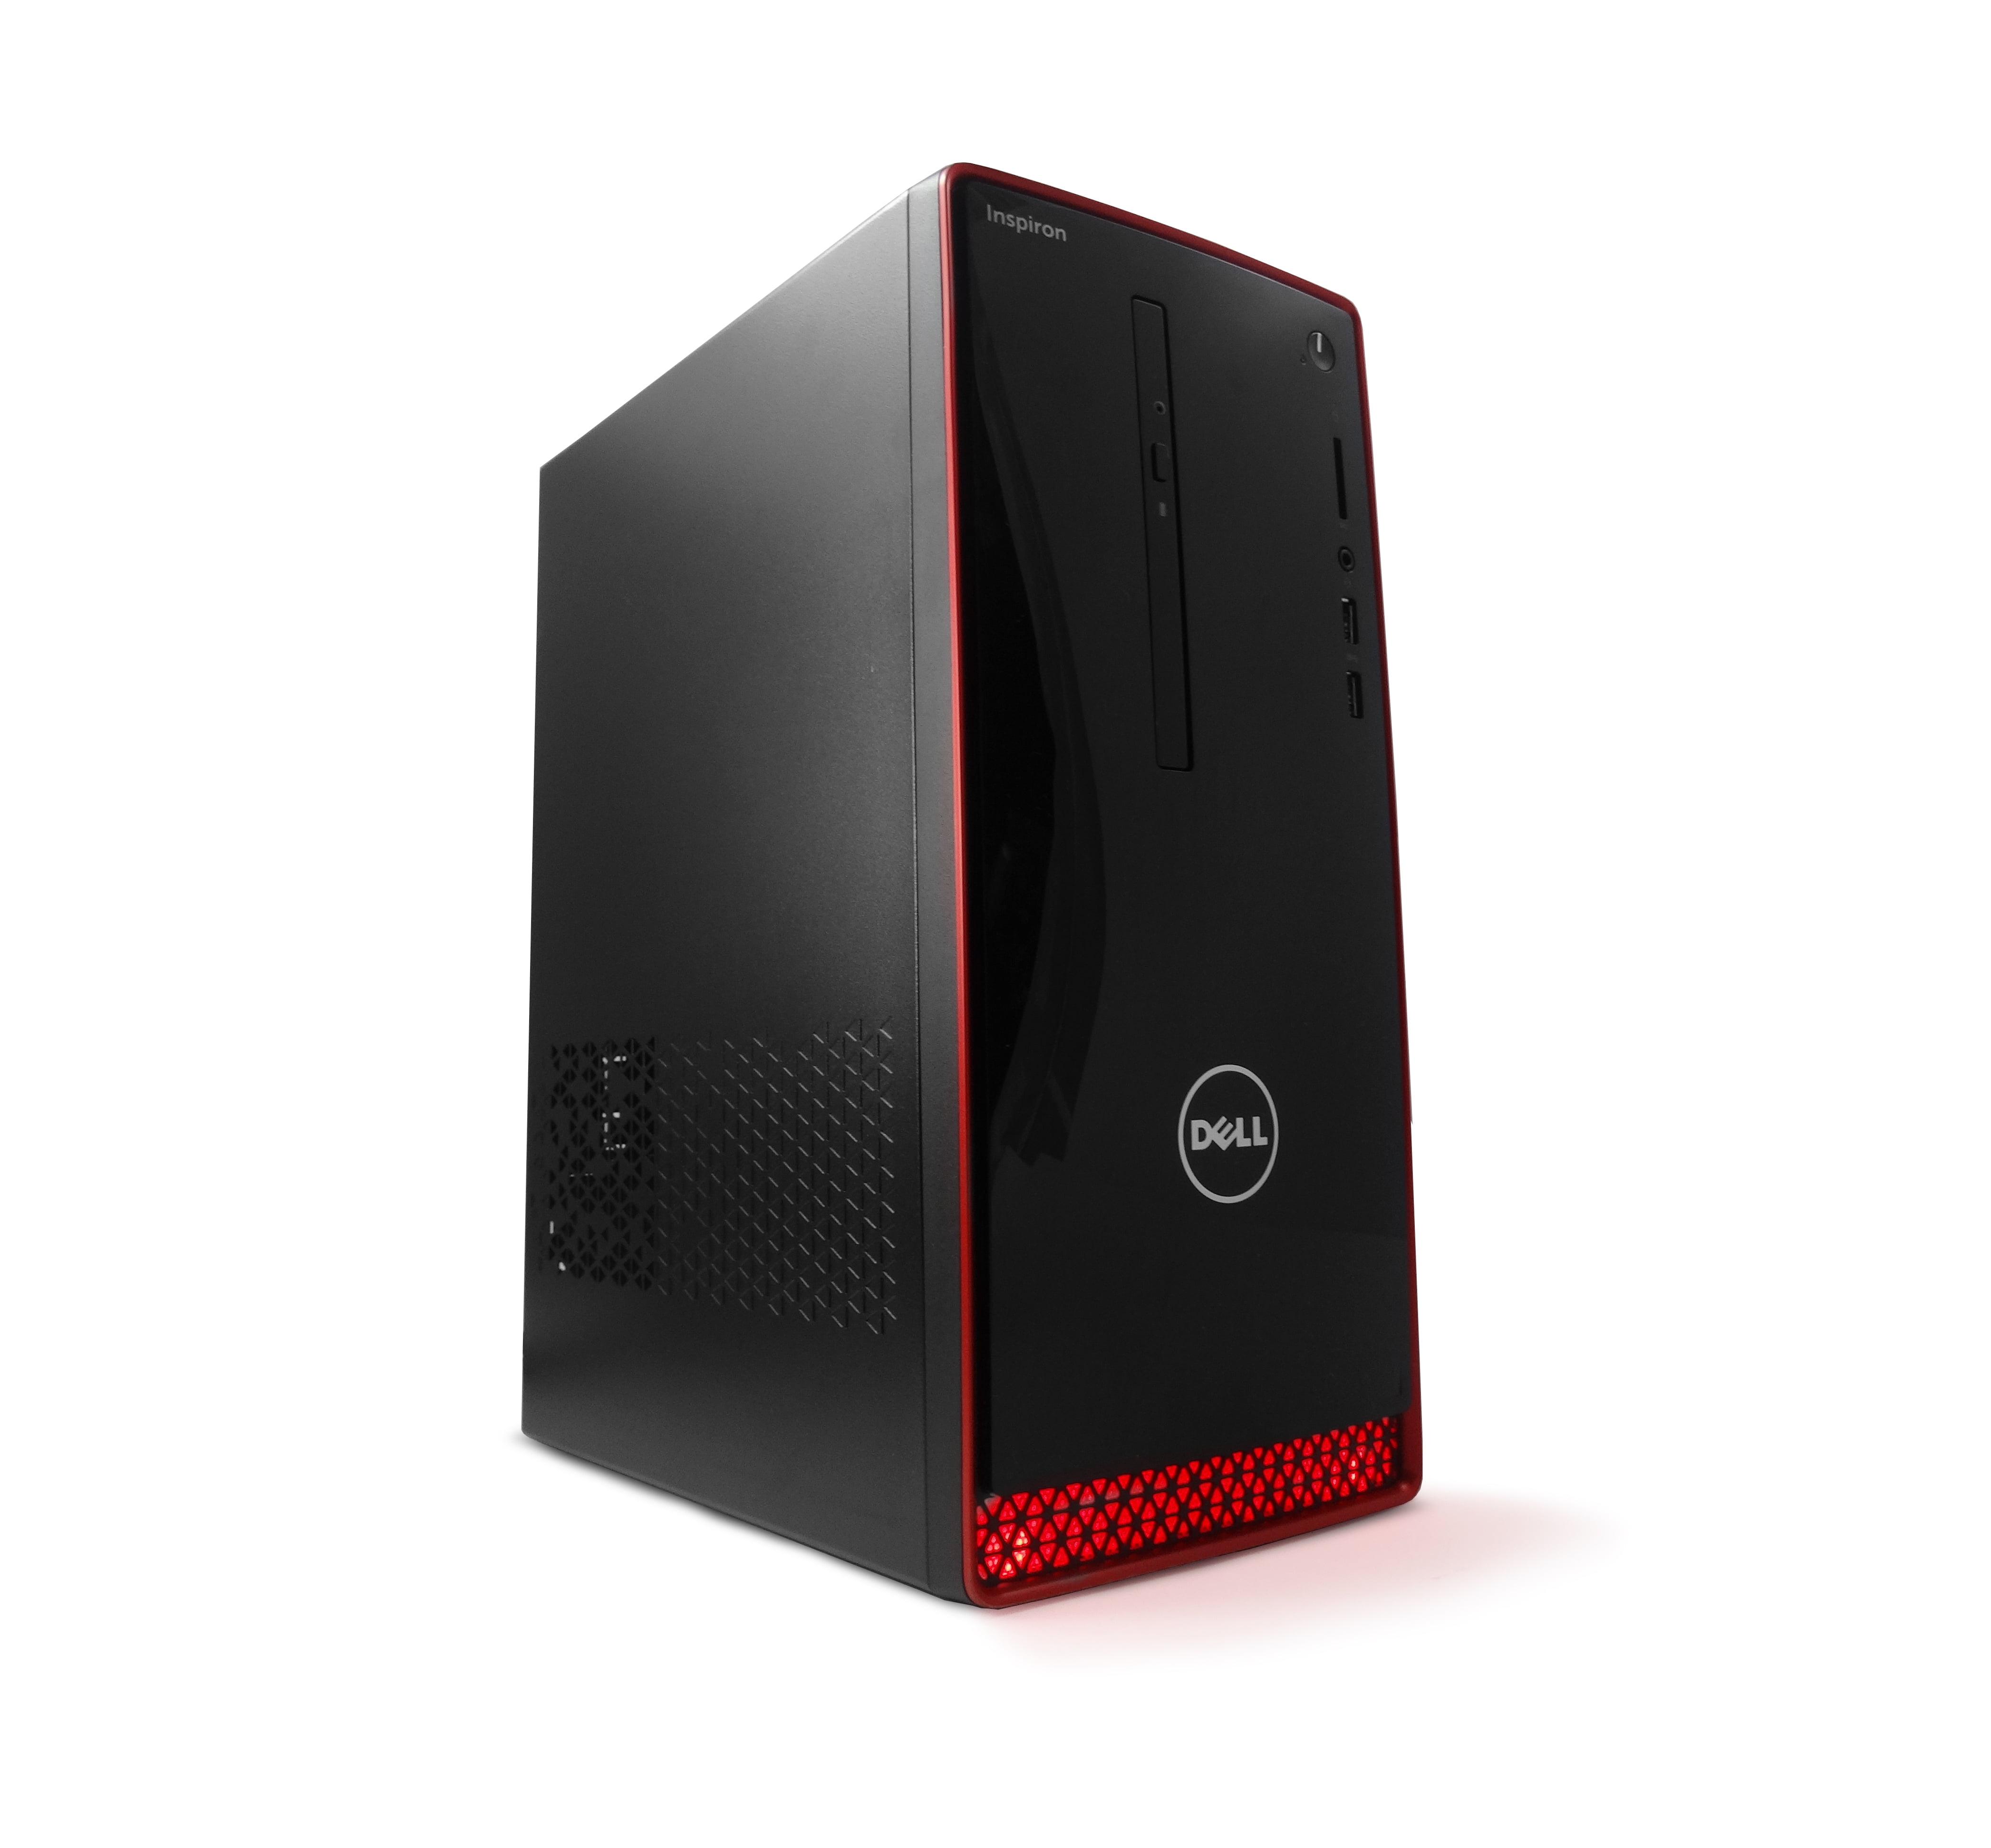 Dell Inspiron 3655 Mini-Tower with AMD A8-7410 2.20GHz Quad Core